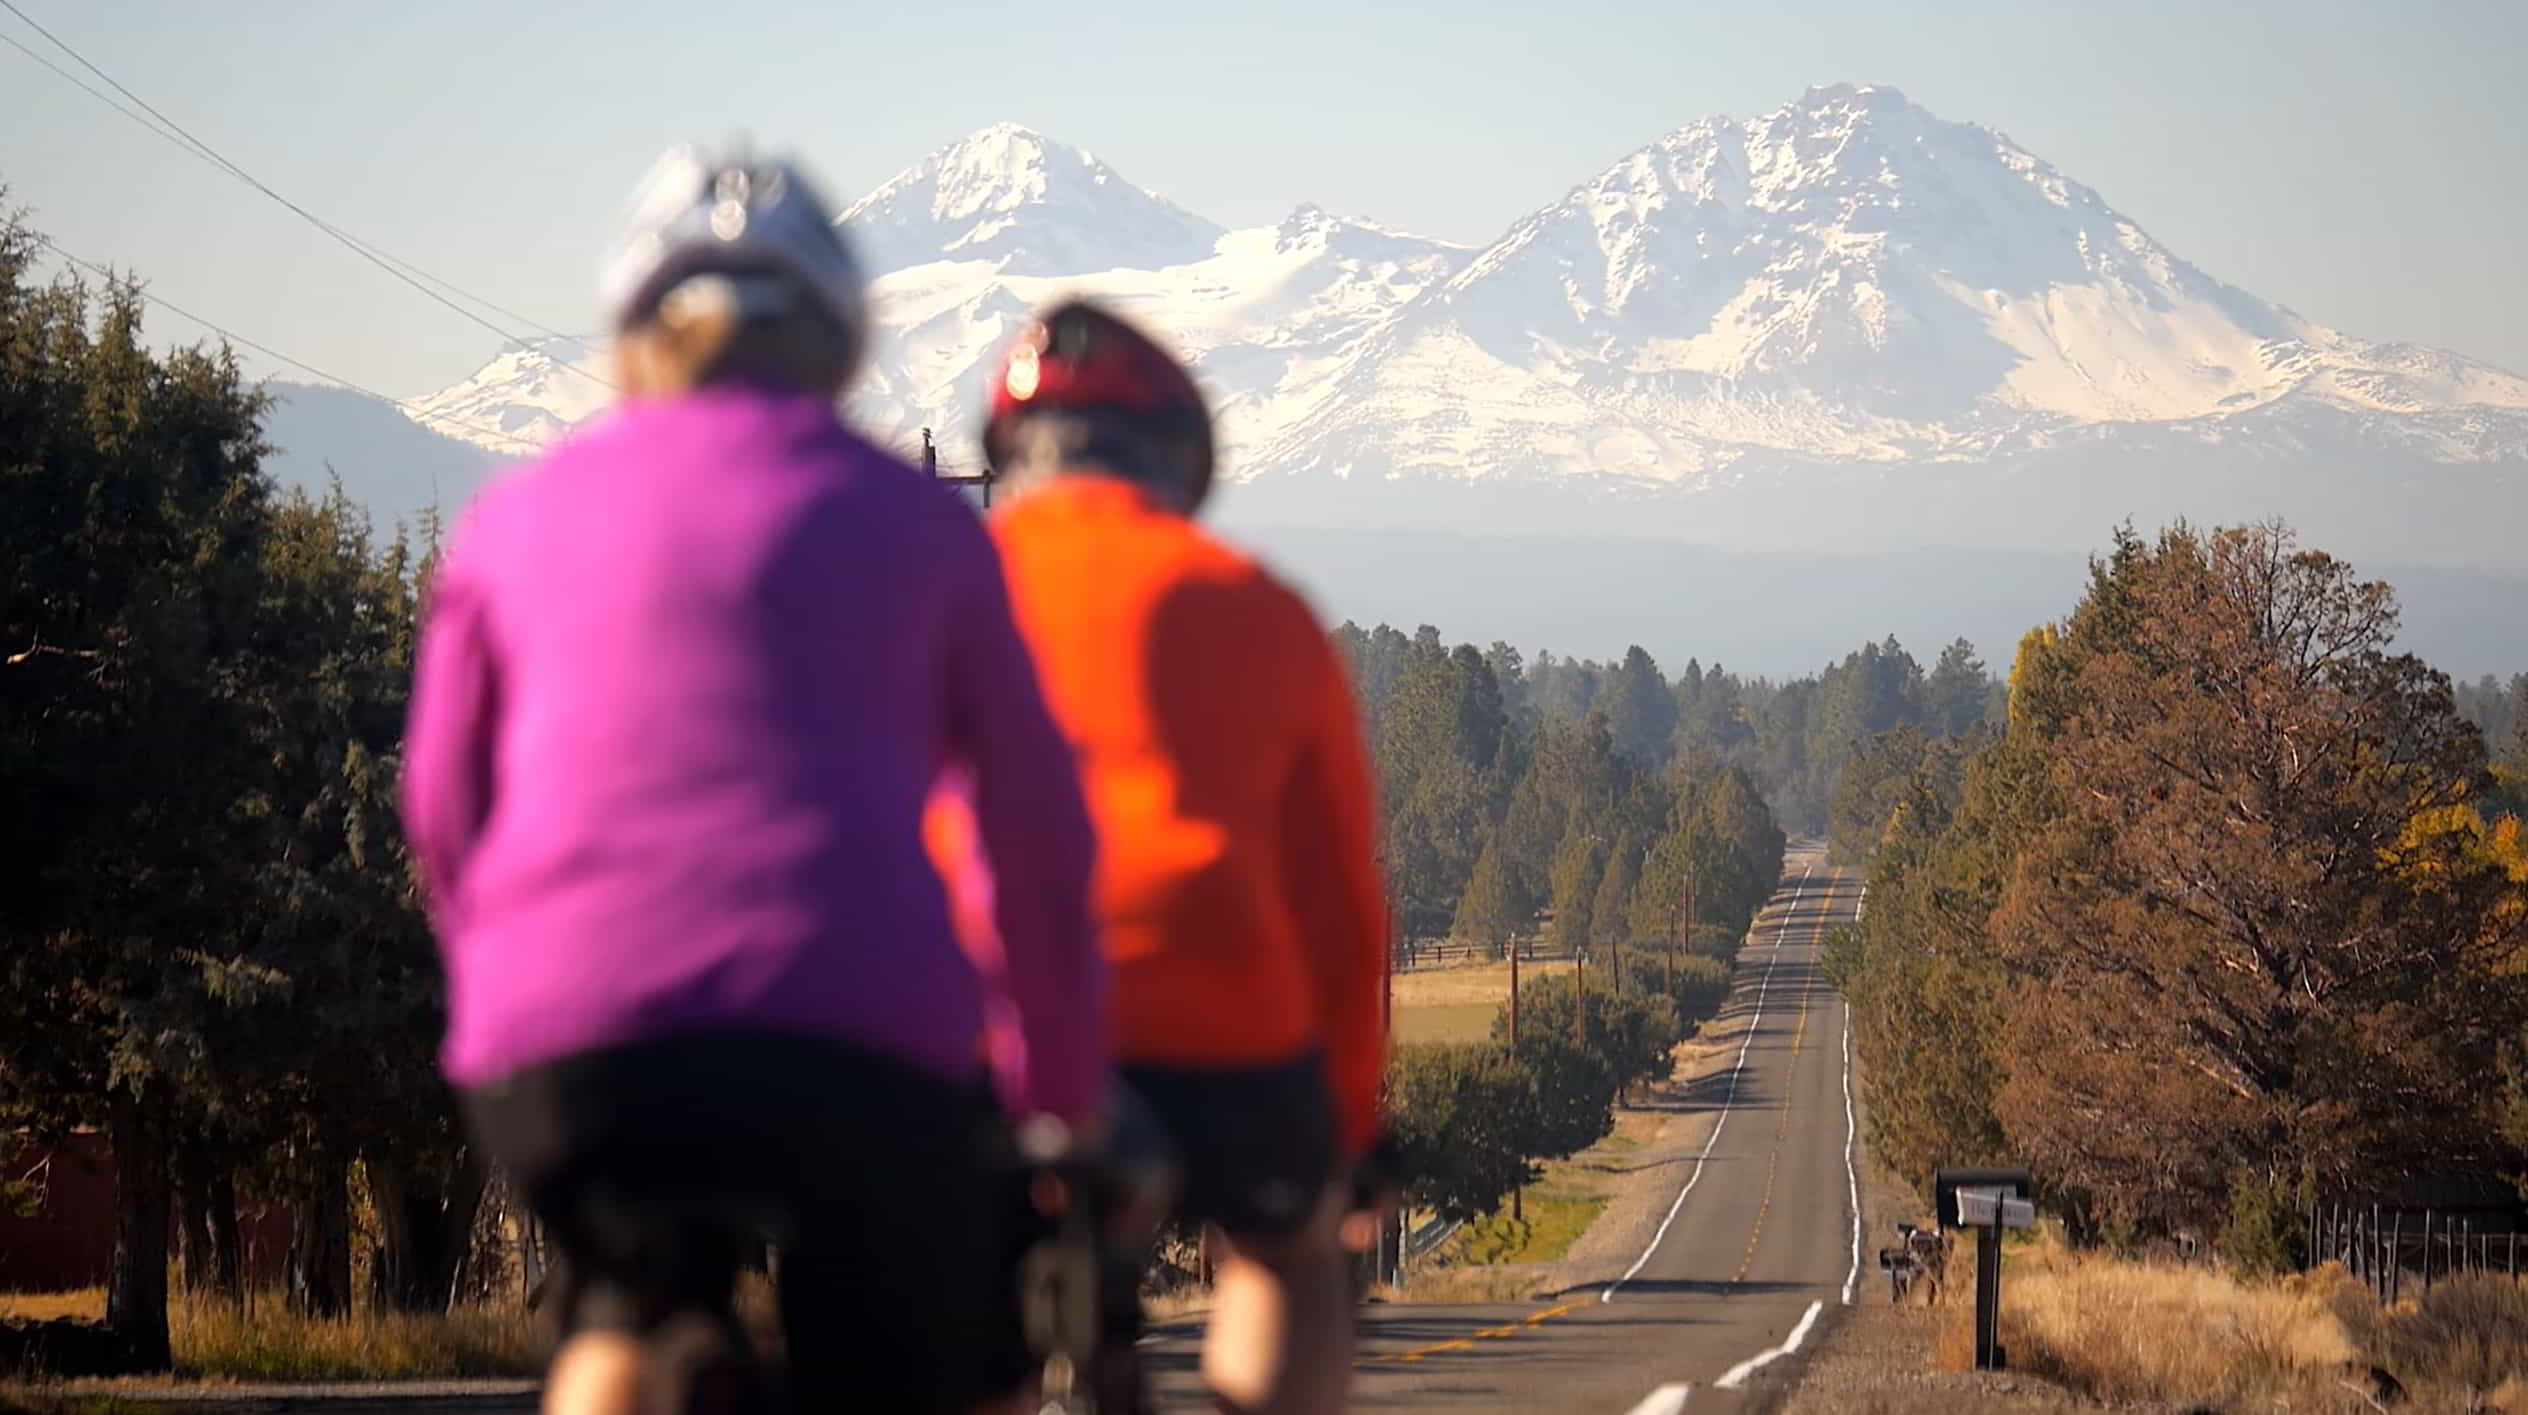 Close up of two bicyclist biking down a back road, away from the camera and towards the sisters mountains in the background